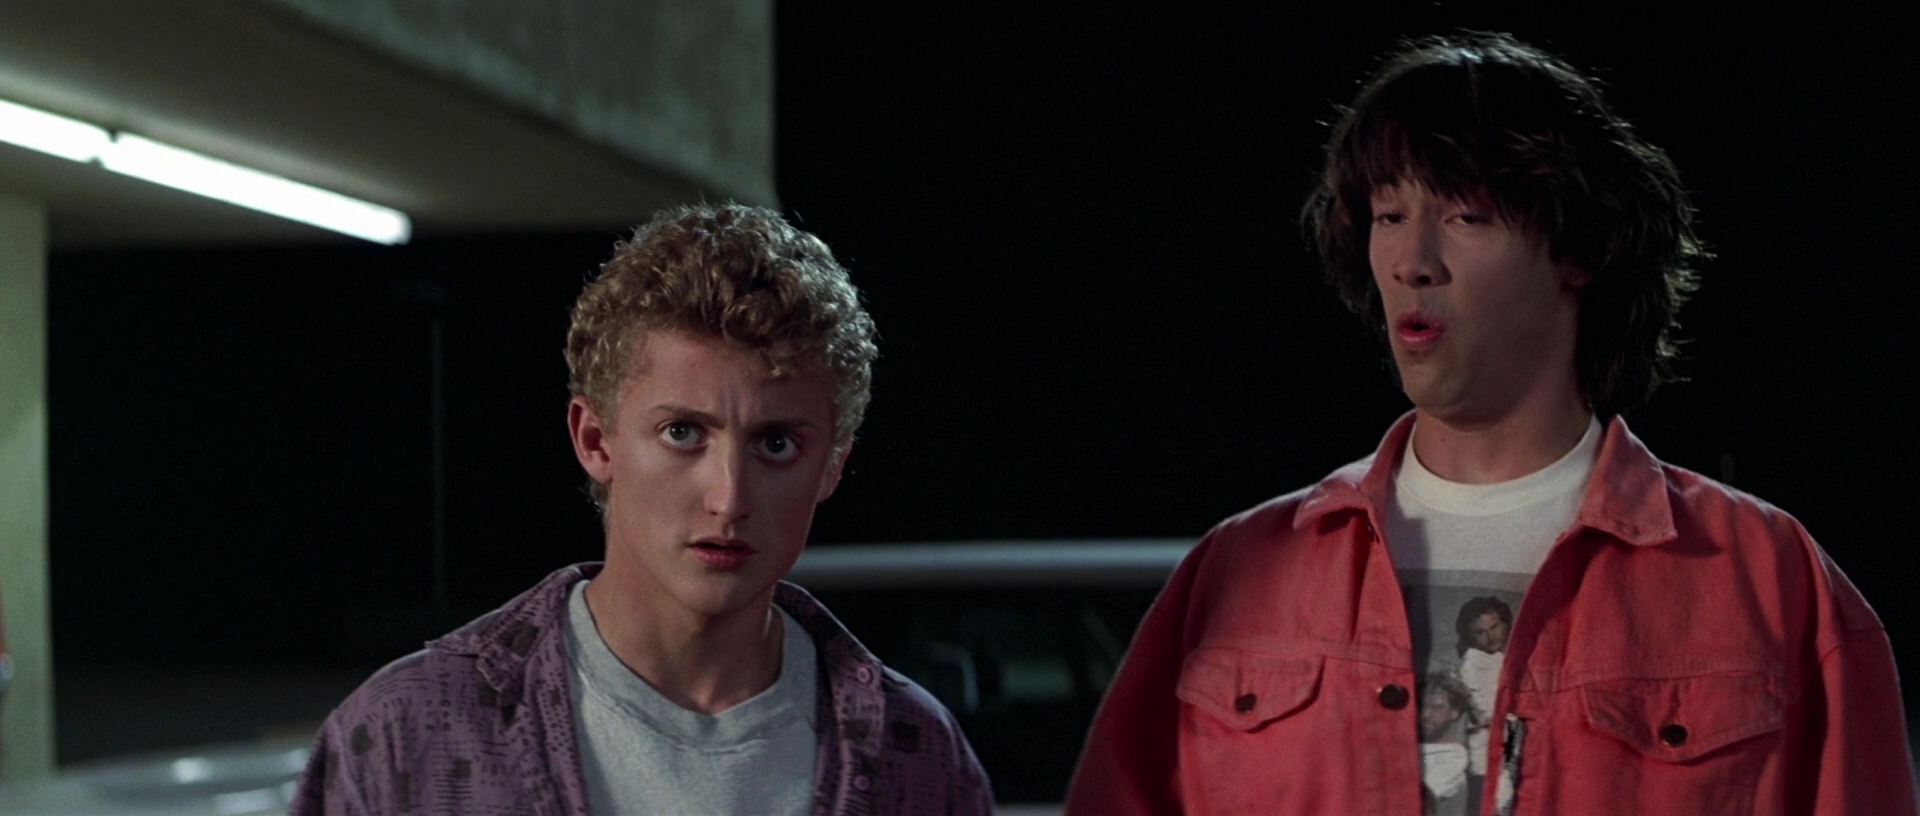 Bill and ted tumblr